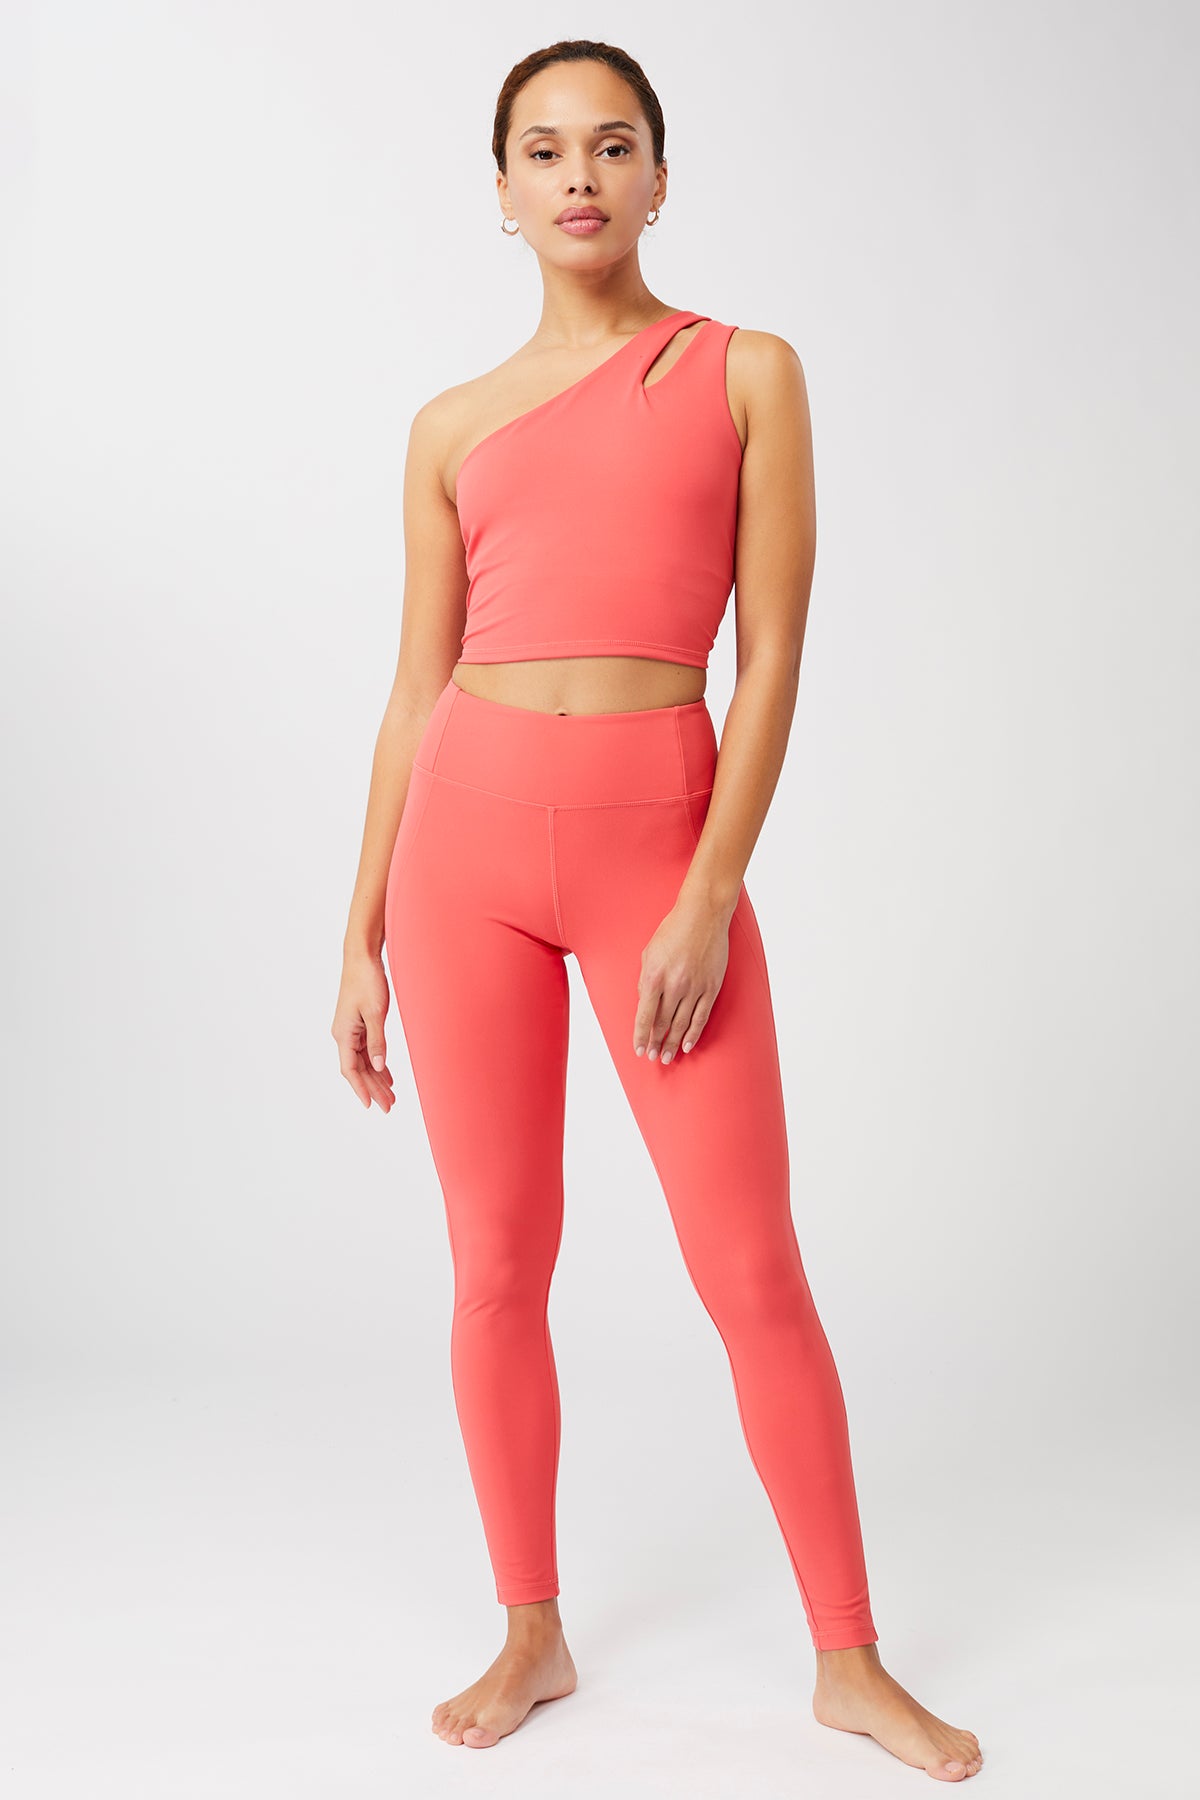 Mandala Yoga Bra Rot Outfit Front - Cropped Shoulder Top